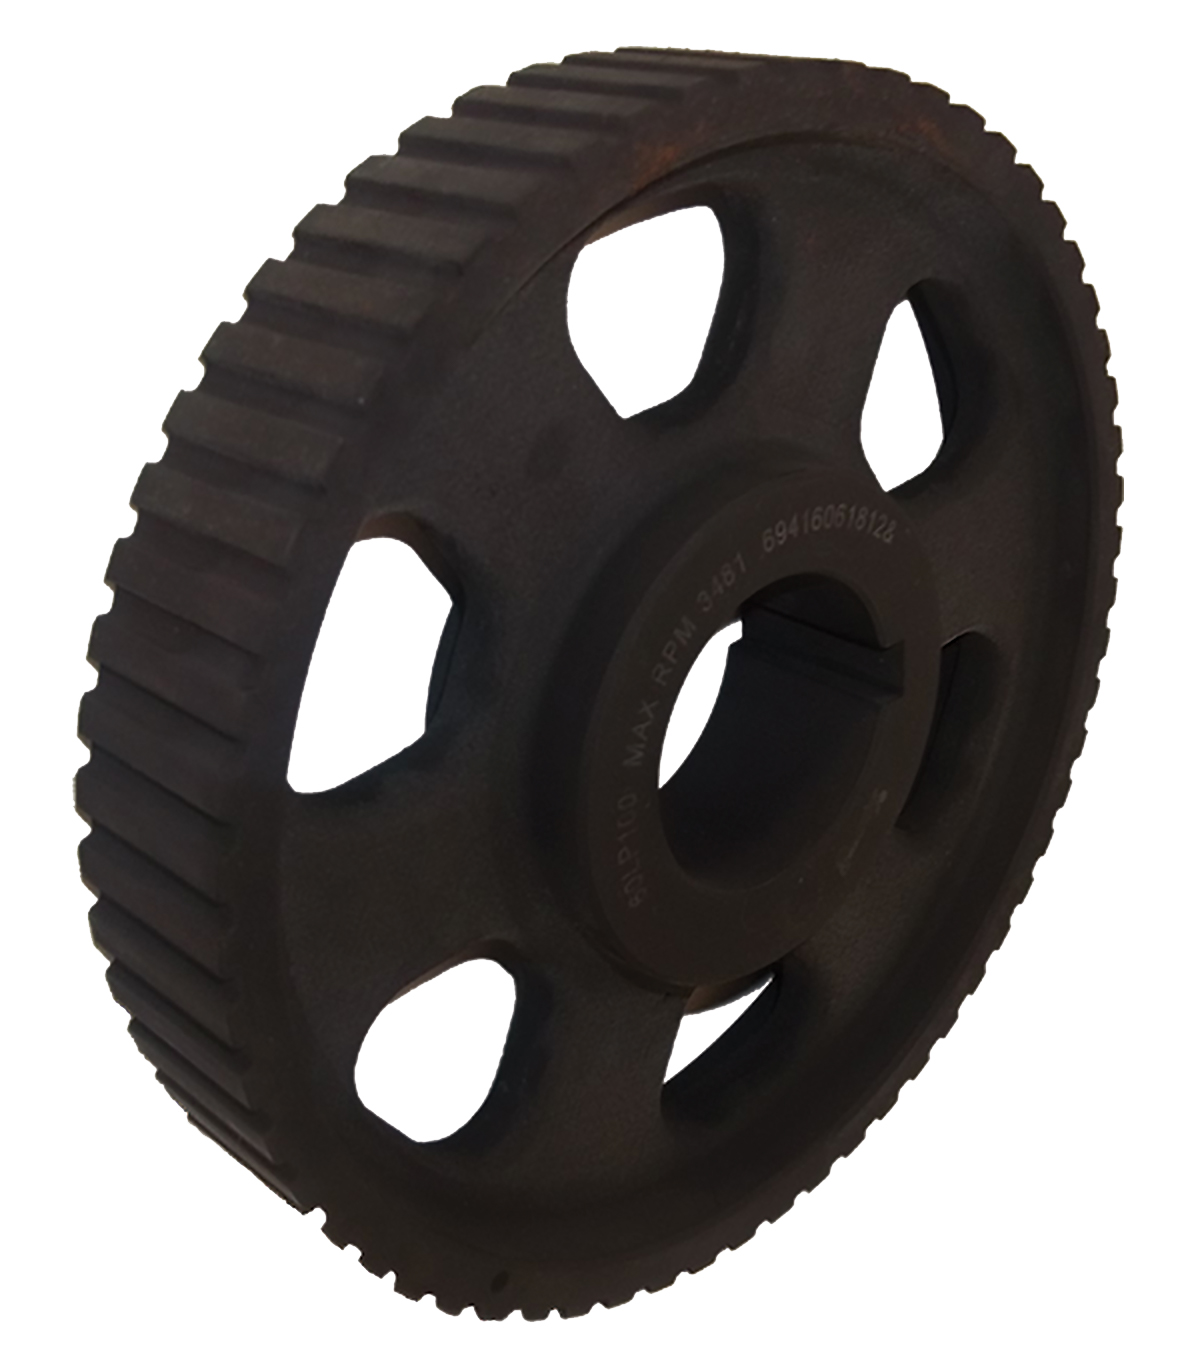 60LP100 - Cast Iron Imperial Pitch Pulleys